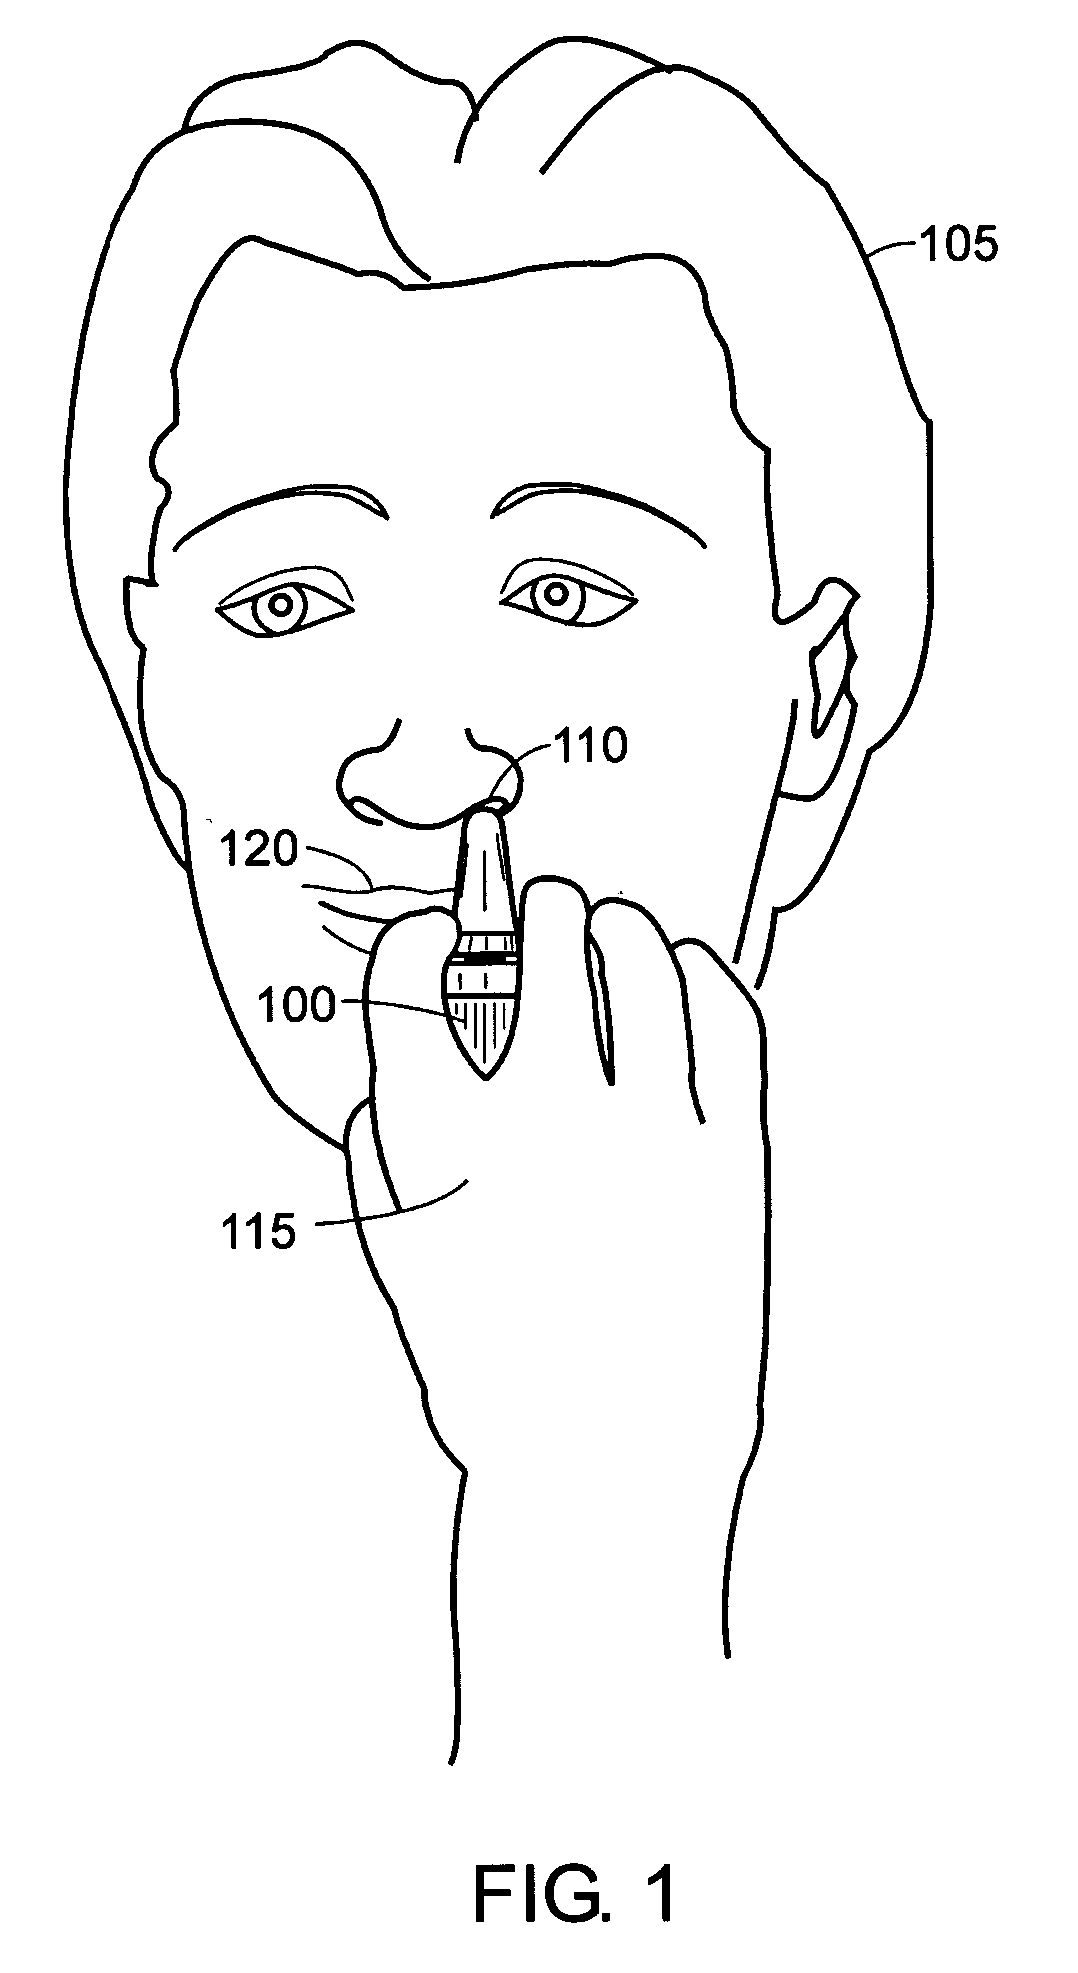 Method of servicing companies associated with a spray device operating under guidelines of a regulatory body